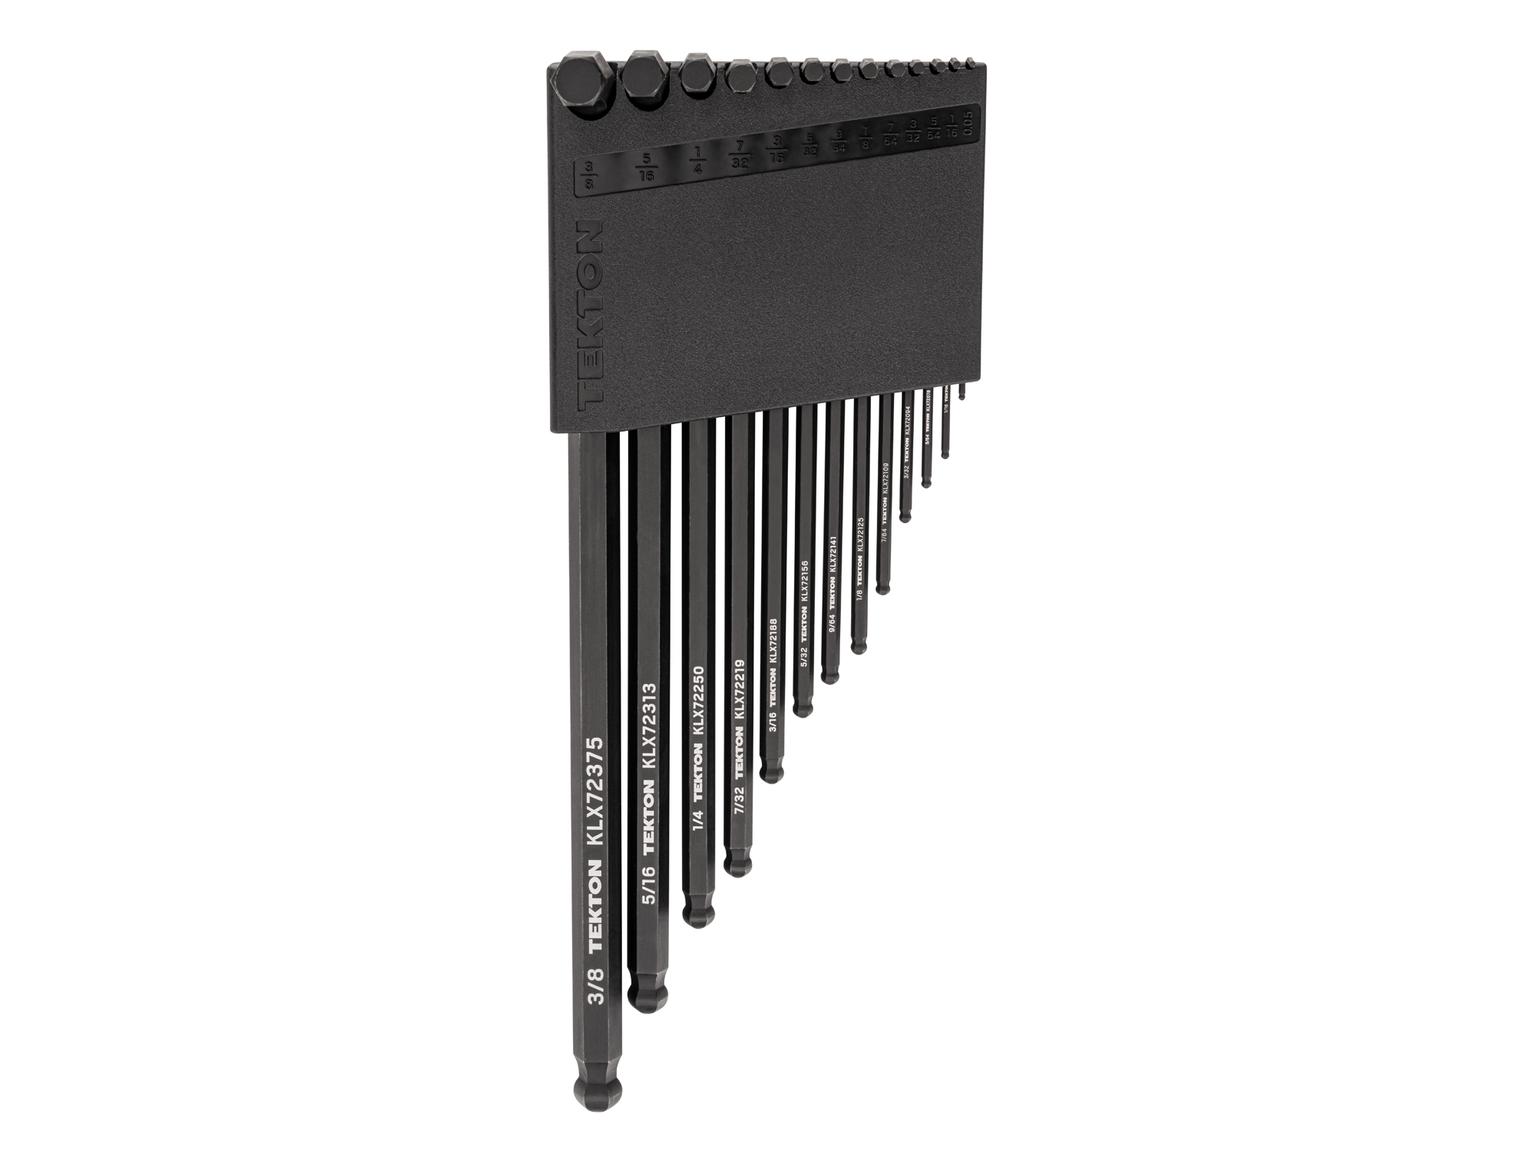 TEKTON KLX91102-D Ball End Hex L-Key Set with Holder, 13-Piece (0.050-3/8 in.)